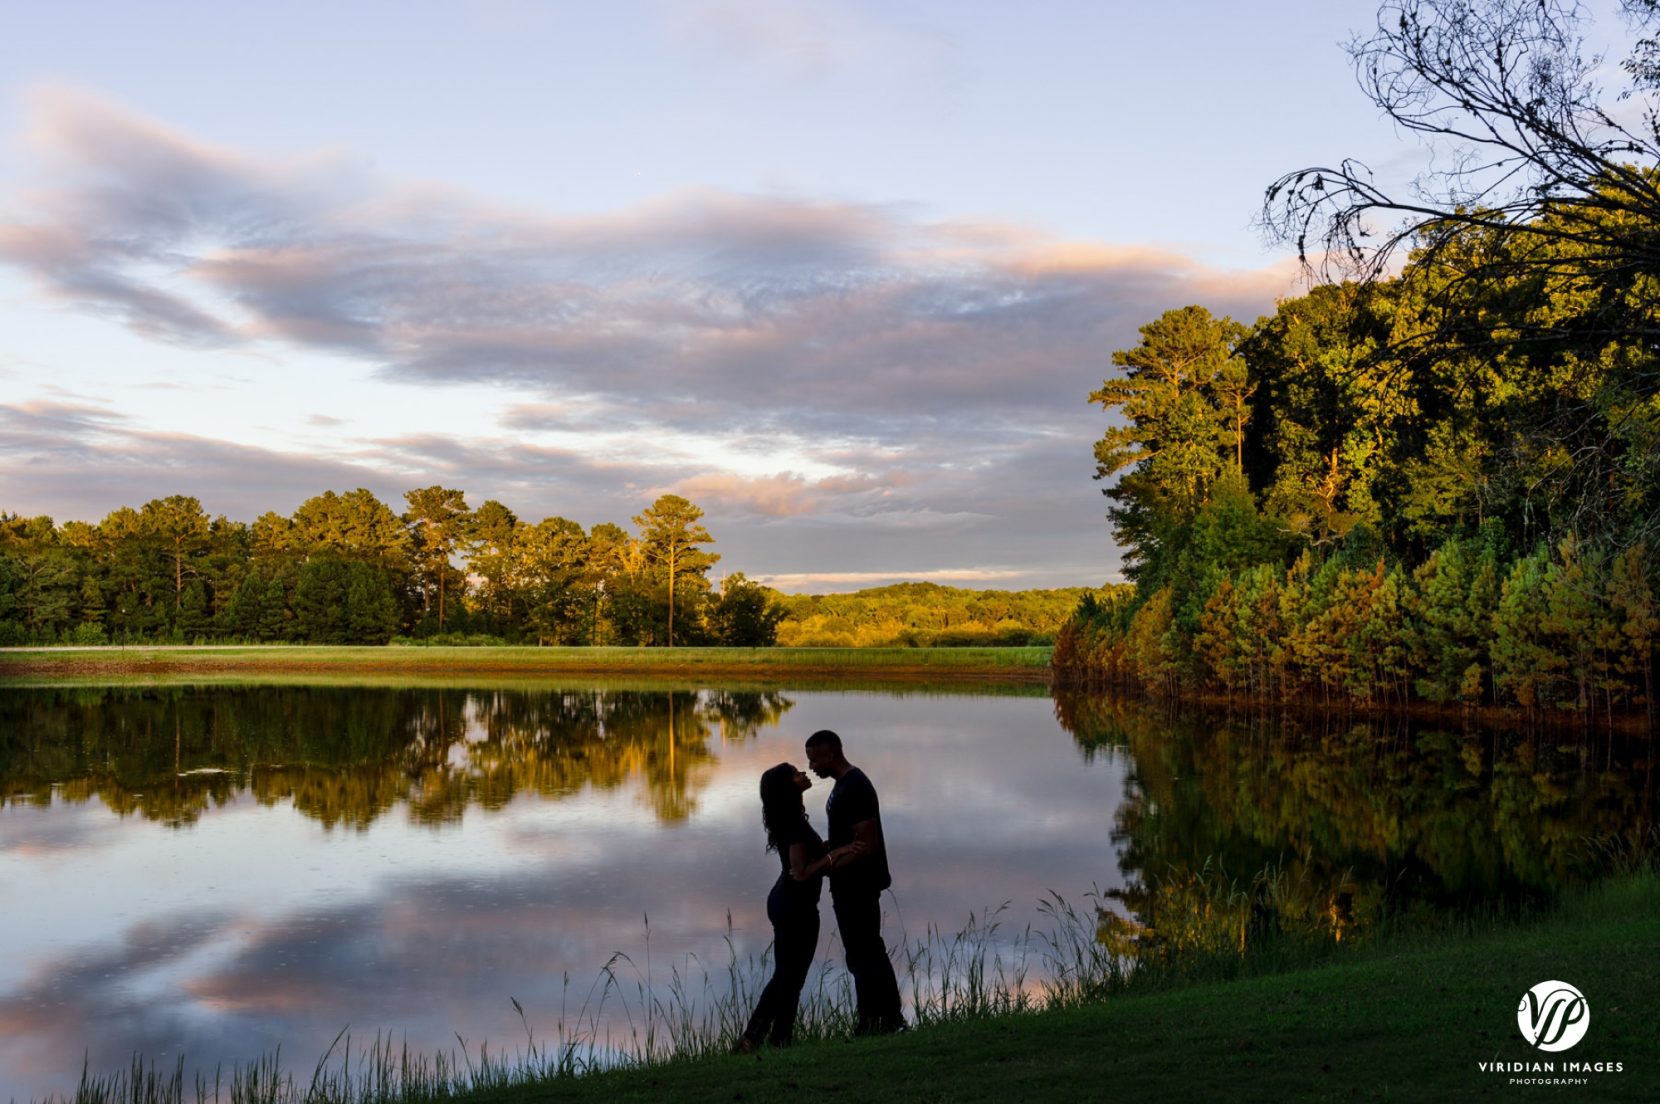 silhouette of couple against mirror like lake at sunset at foxhall